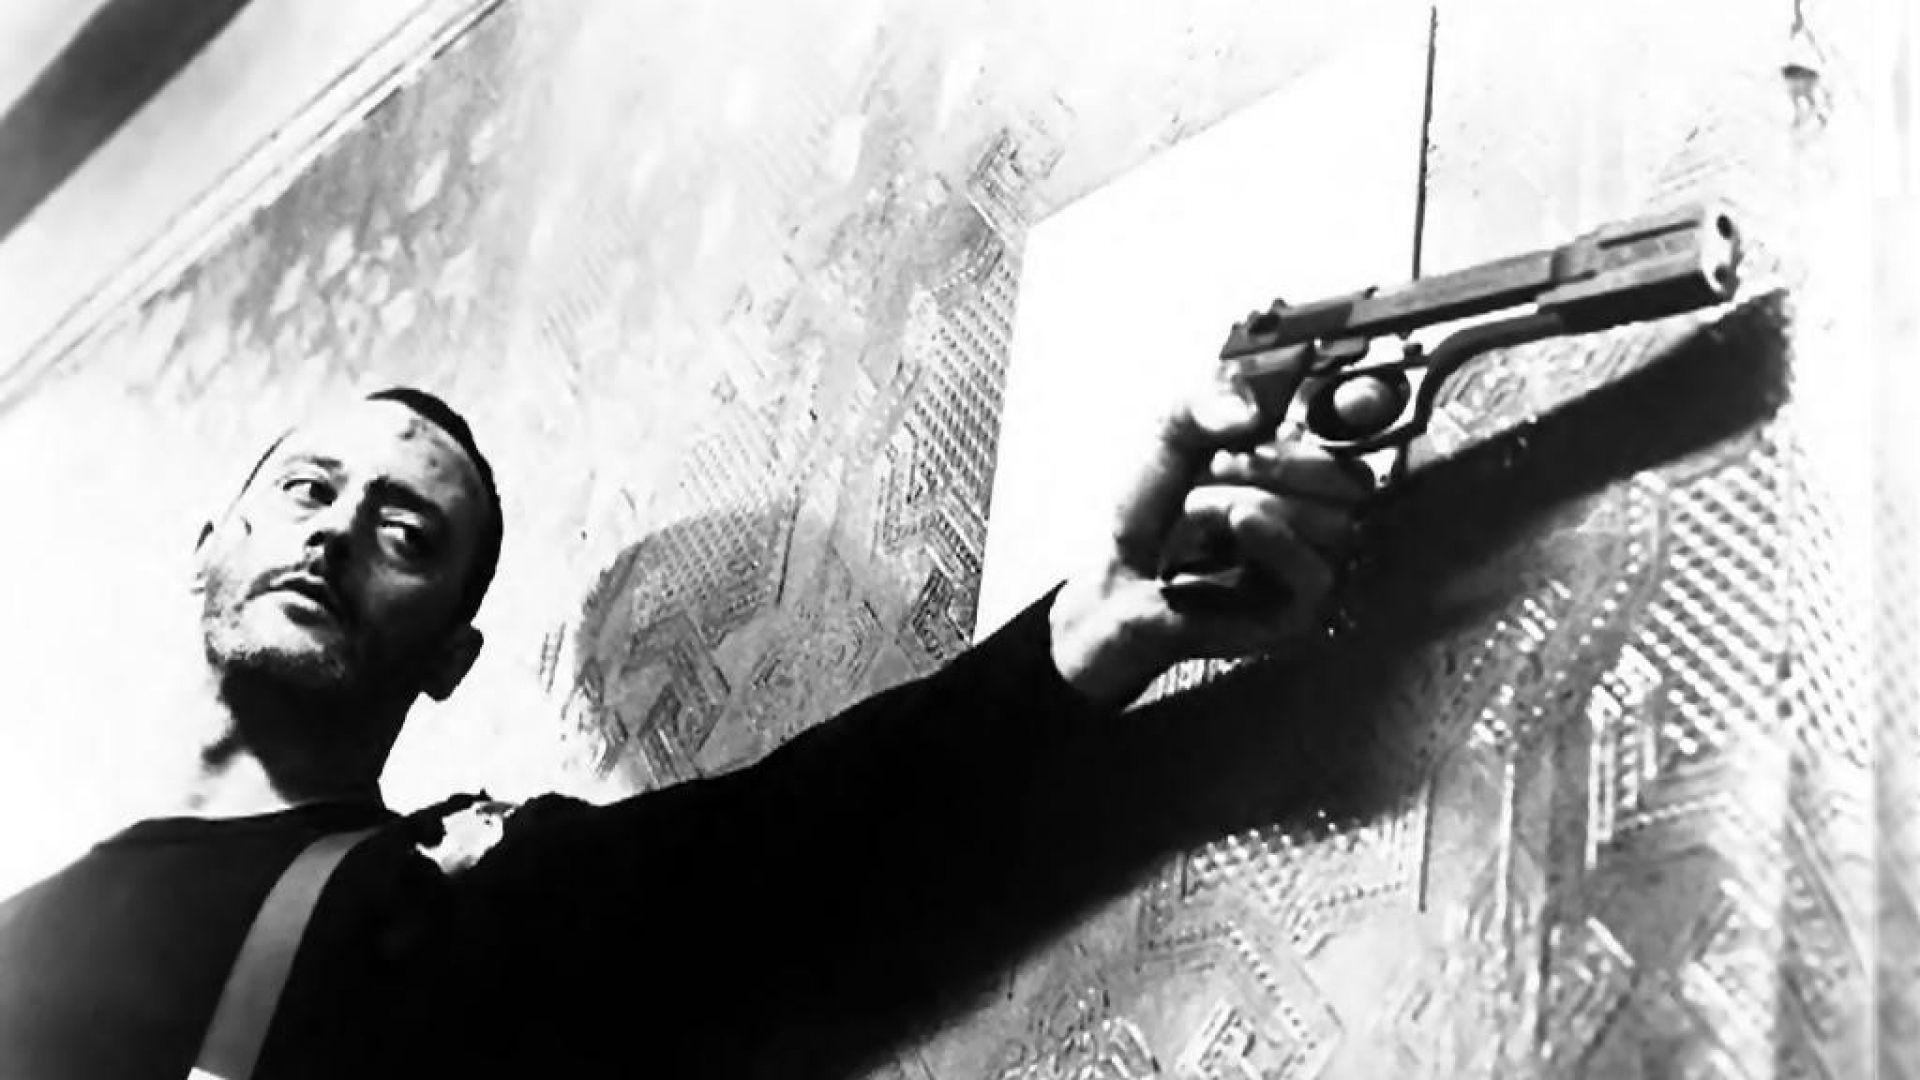 Jean Reno with a gun wallpaper and image, picture